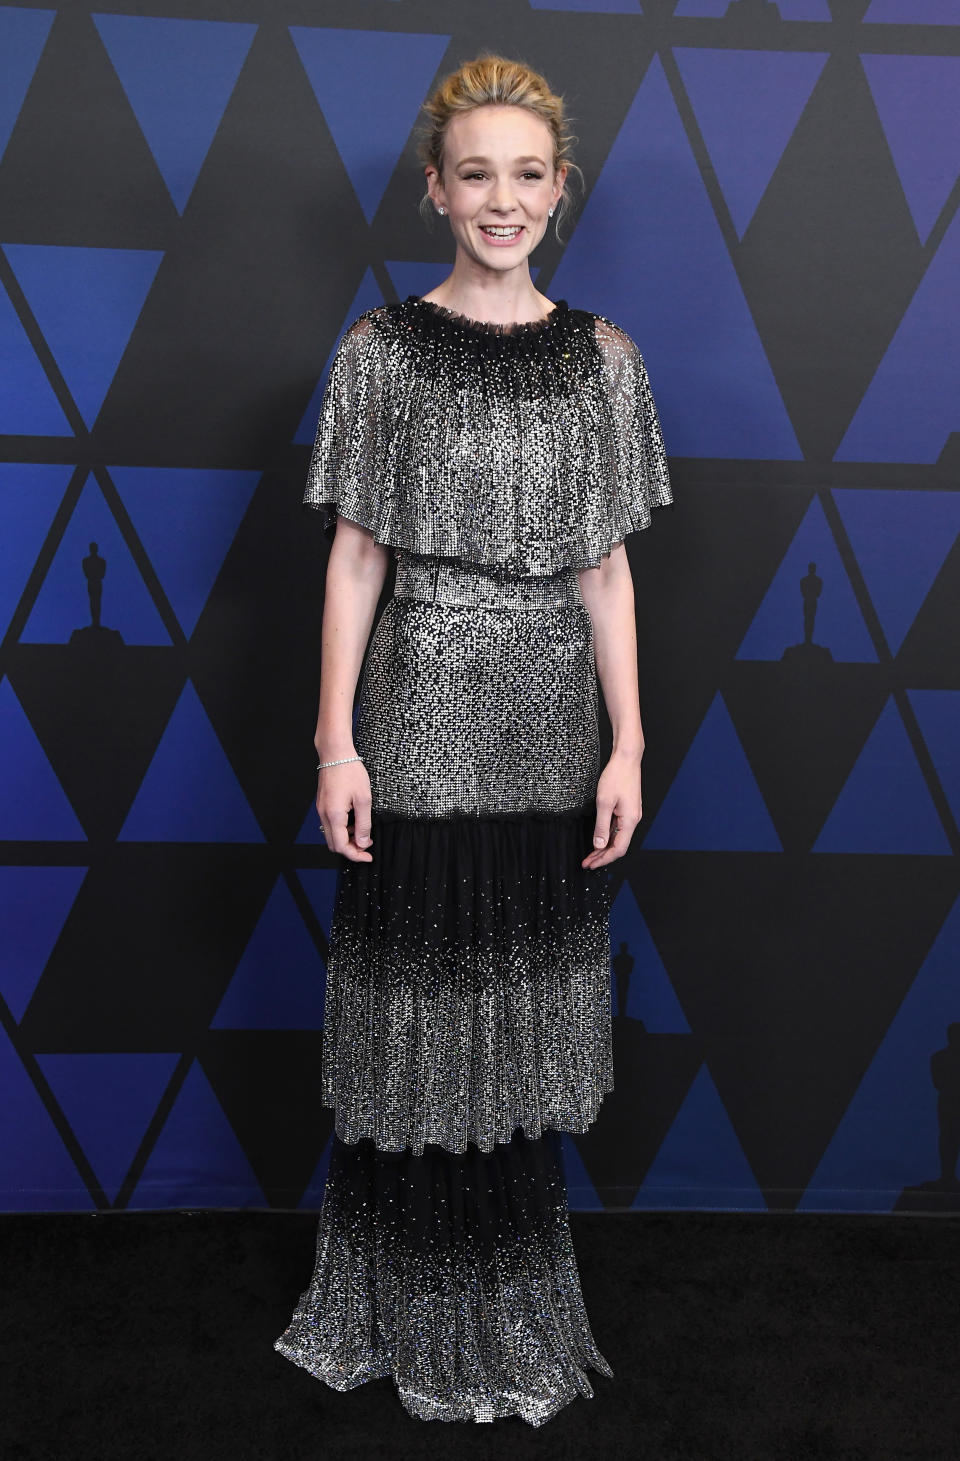 Carey Mulligan at the Governors Awards in Los Angeles